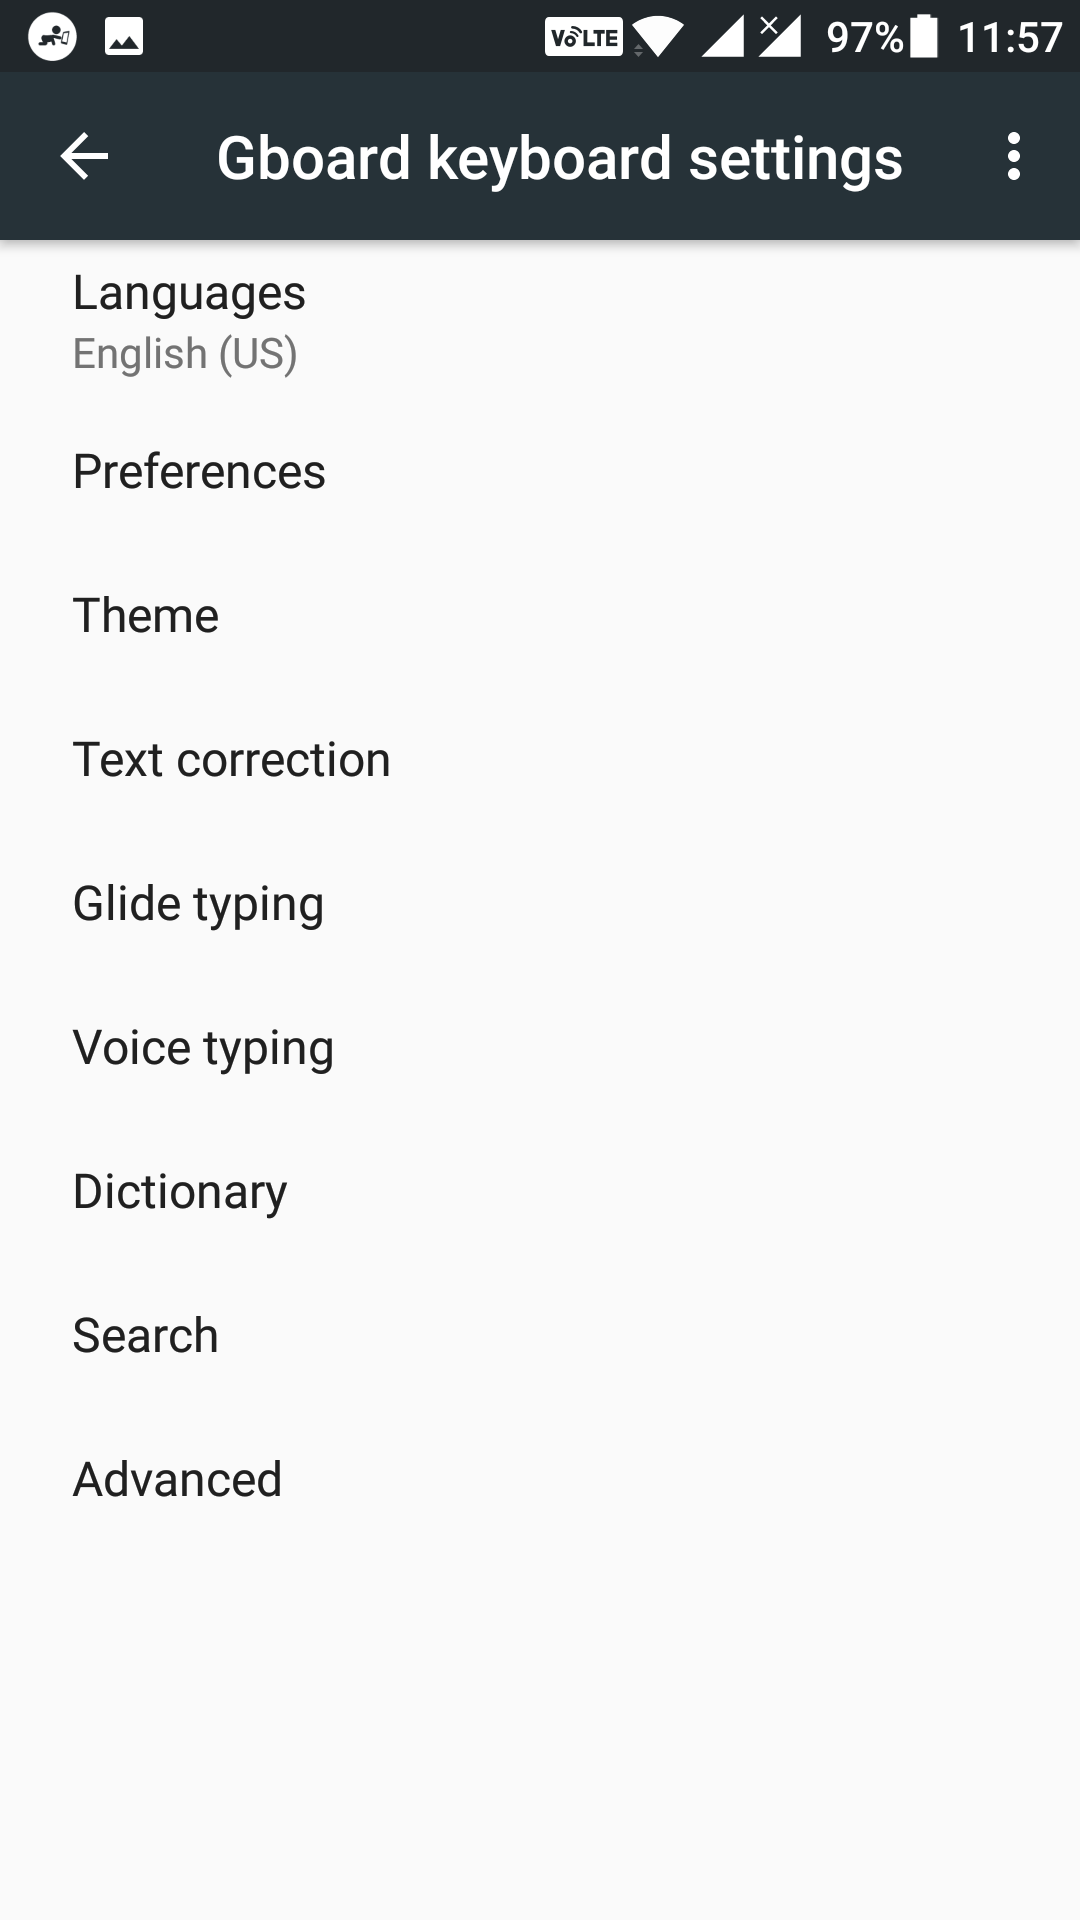 gboard-performance-text-correction